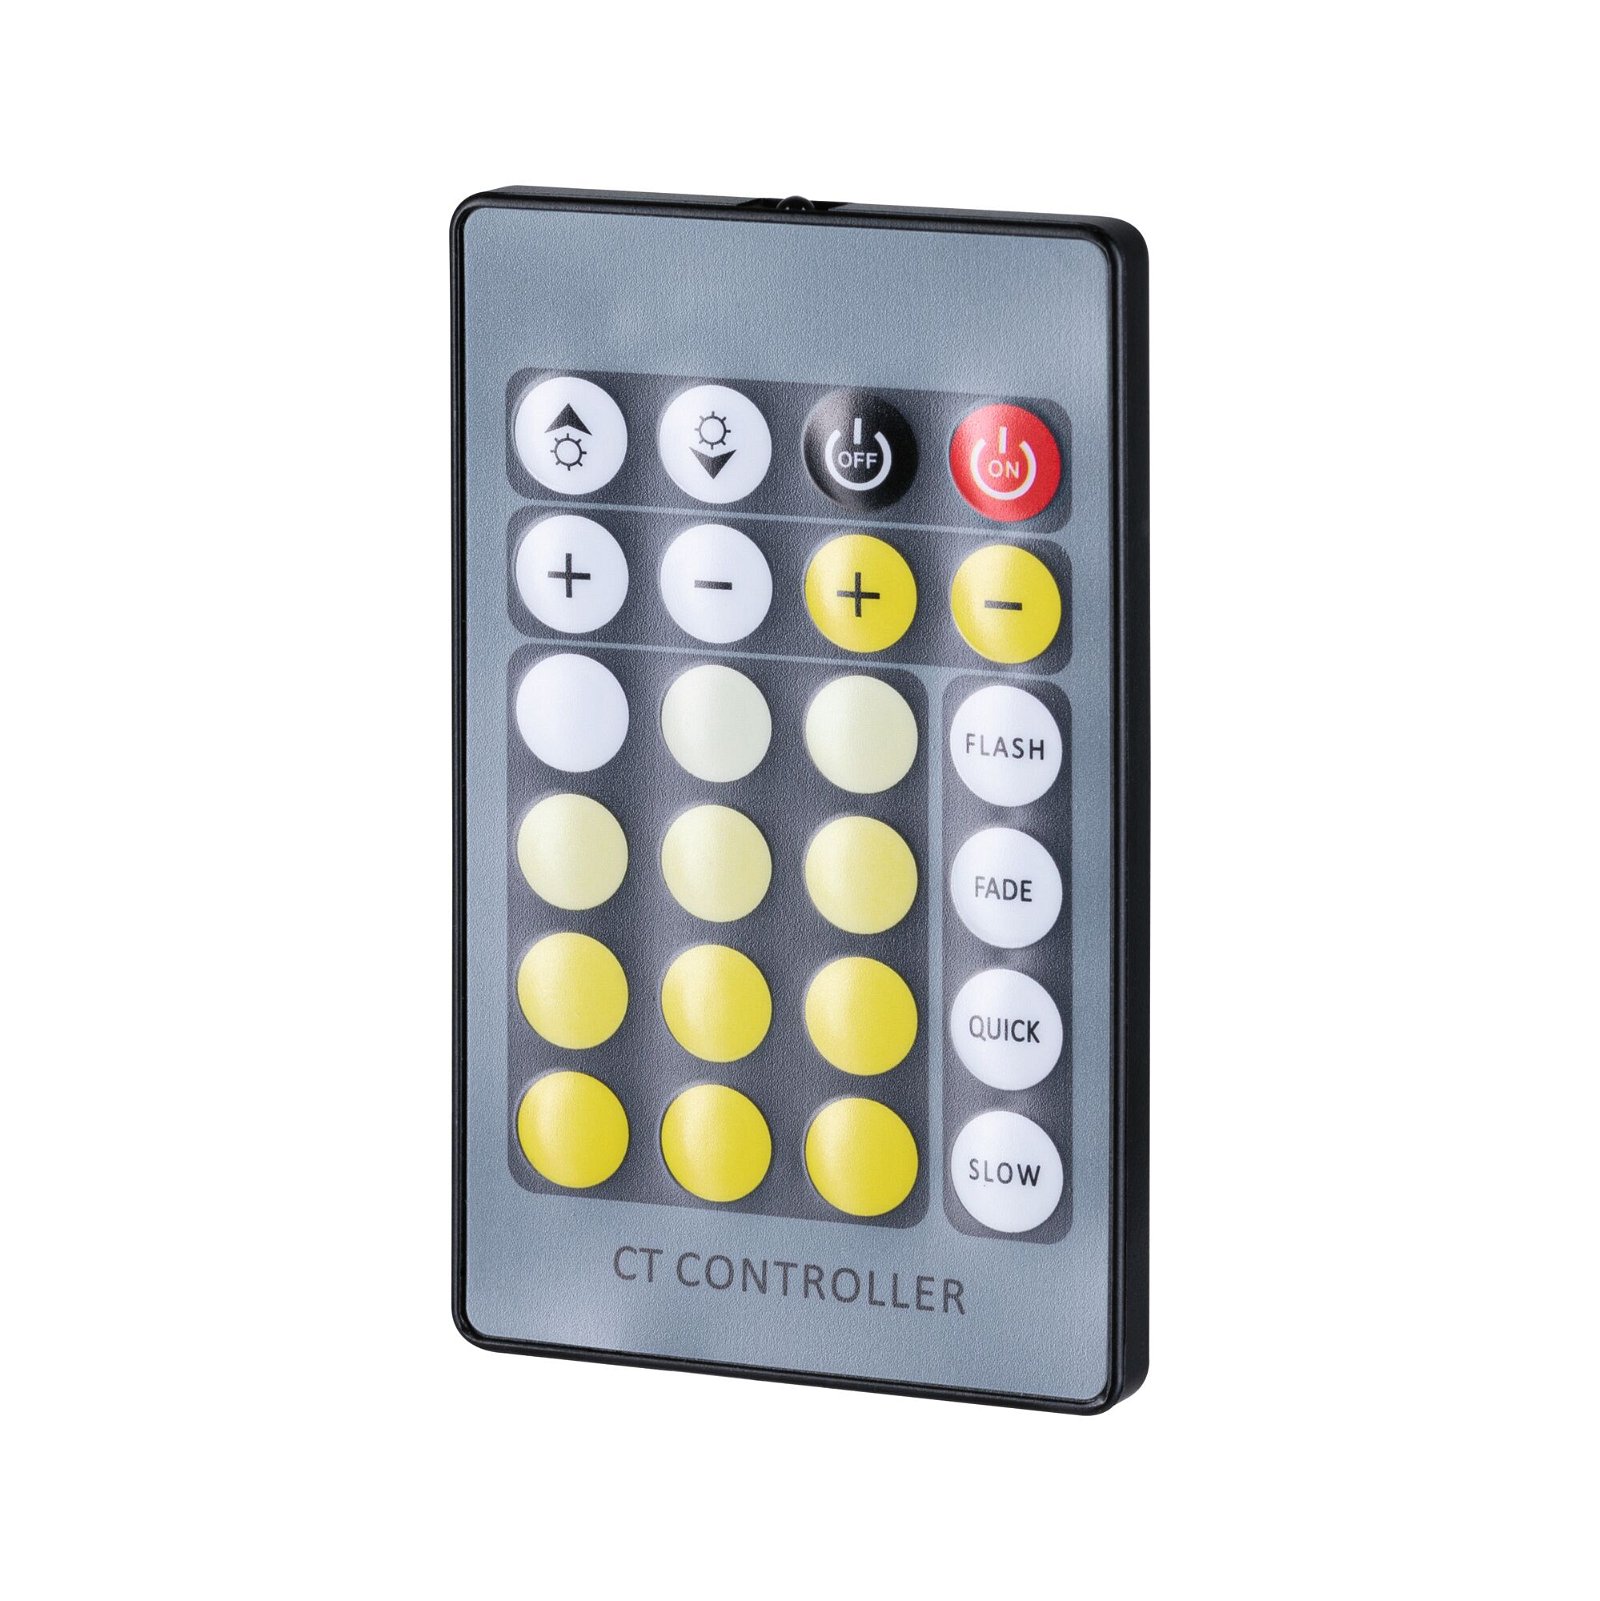 MaxLED Controller Tunable White inkl. IR-Remote DC 24V max. 144W Hvid